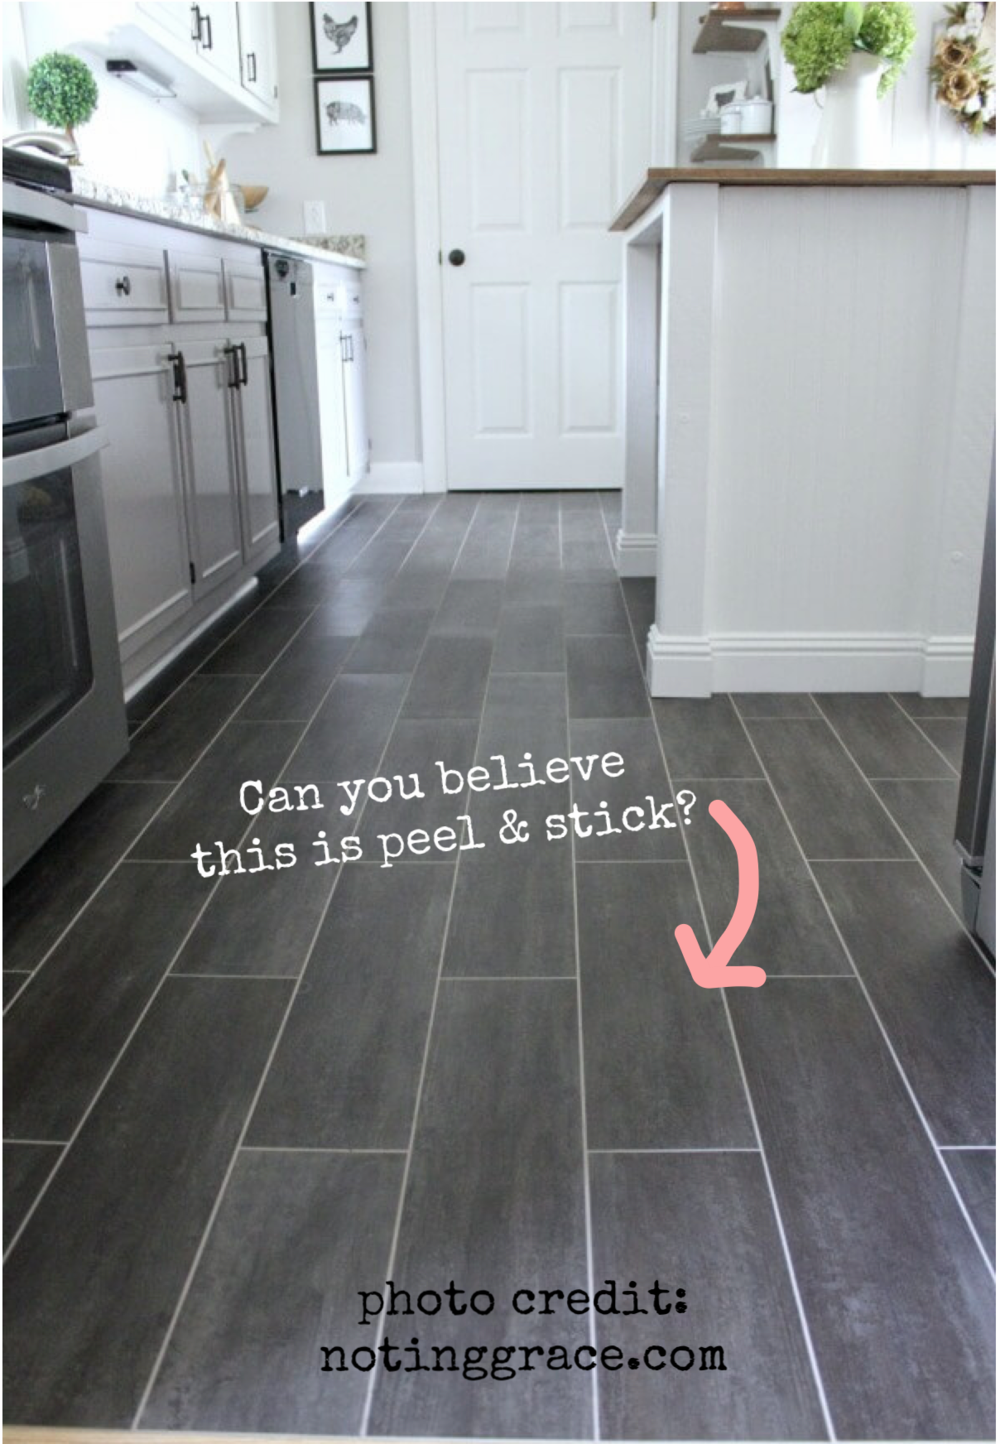 Ideas For Covering Up Tile Floors, What Type Of Flooring Can You Lay Over Ceramic Tile